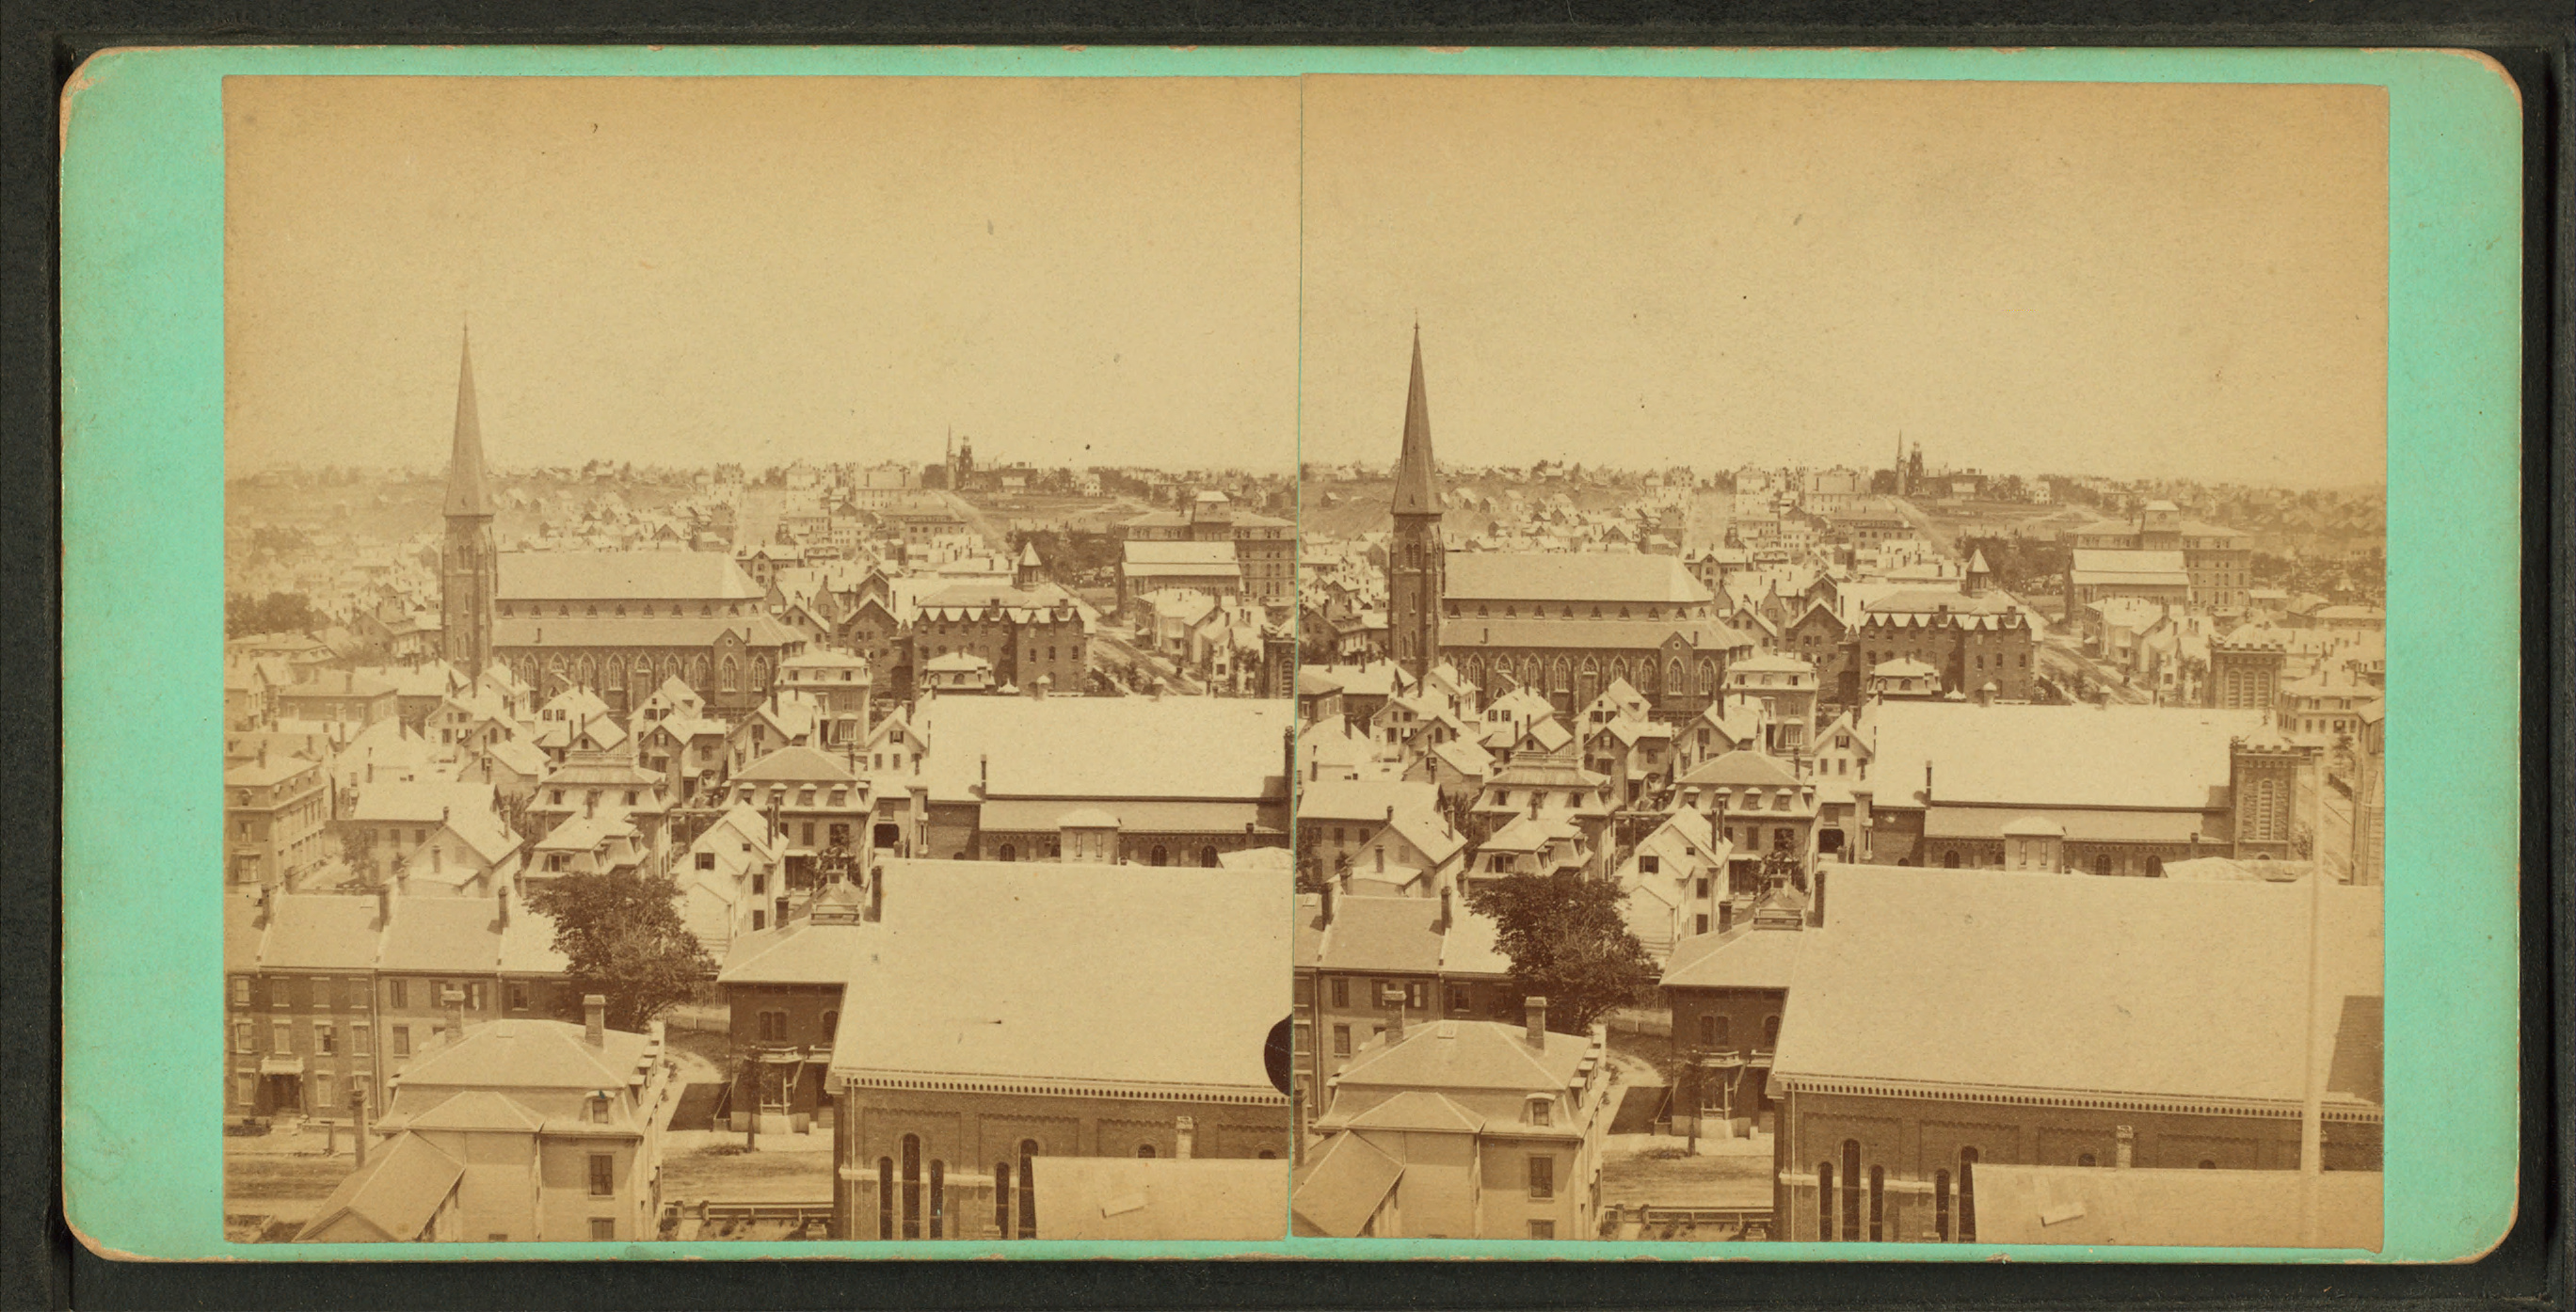 This is a view of Portland, from Robert N. Dennis collection of stereoscopic views